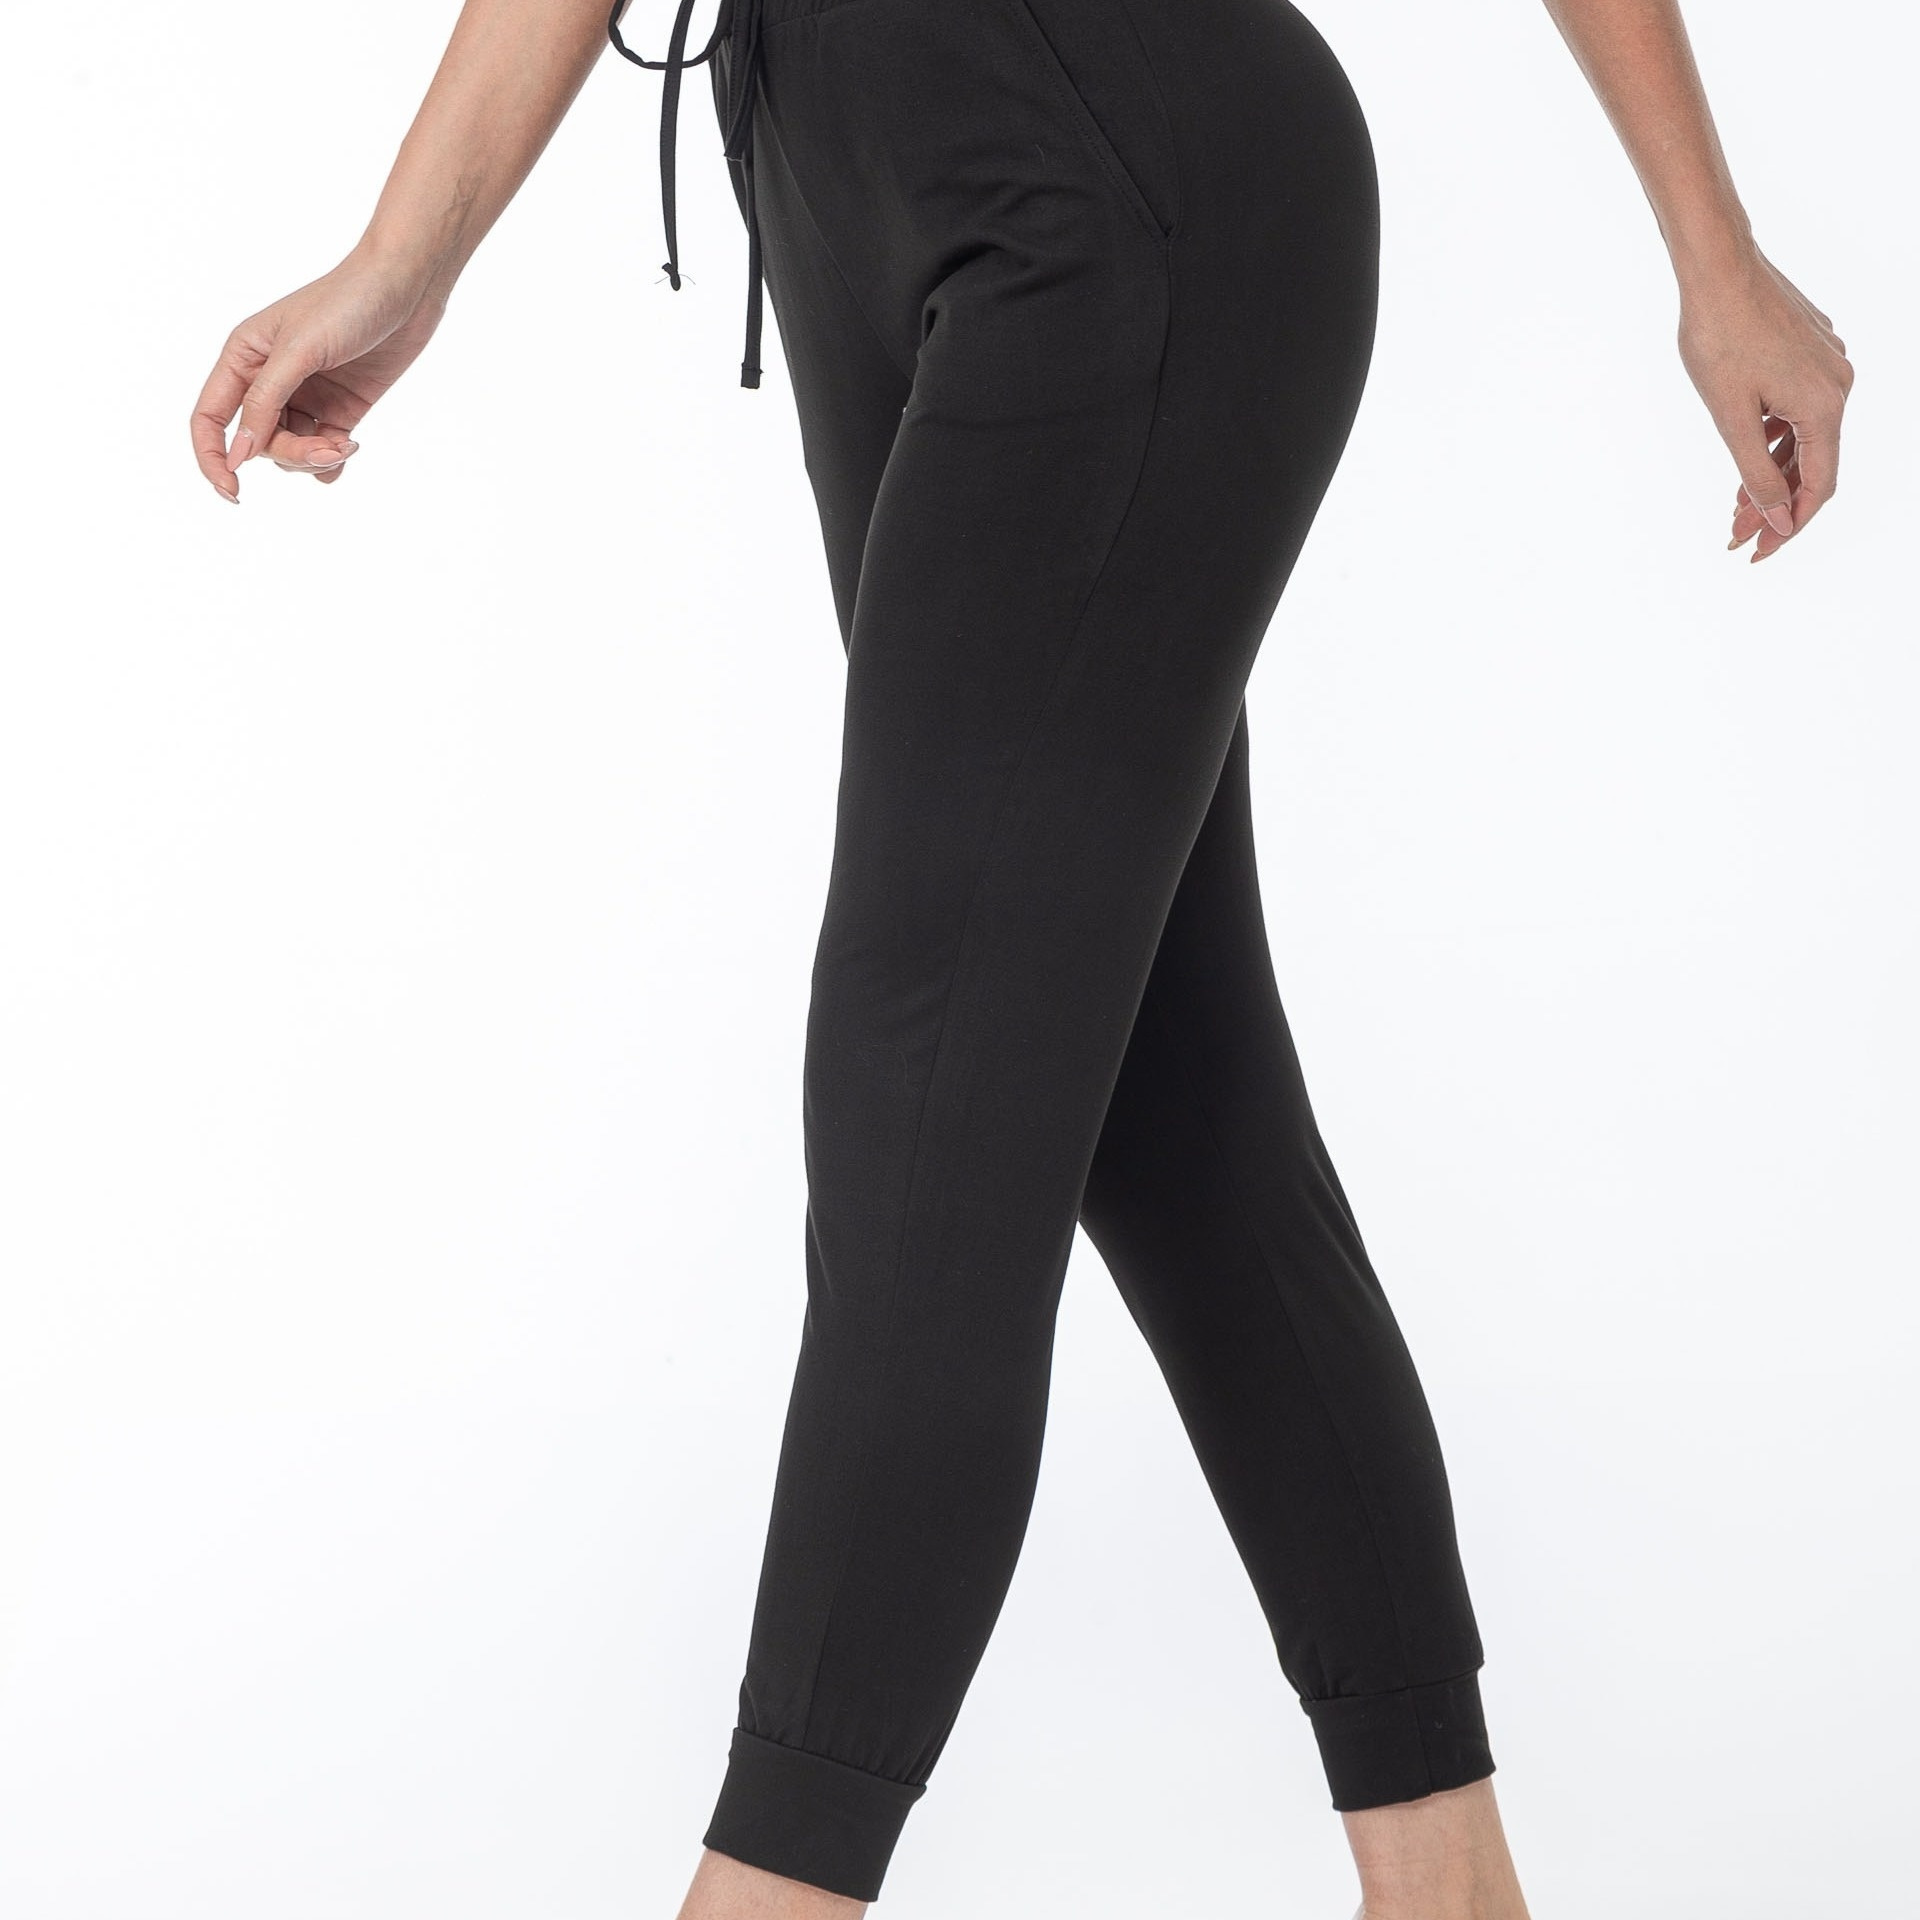 

Women's Casual Fashion Comfort Sports Long Pants, Athletic Style, High-waist With Pockets And Drawstring, Stretch Fit, Solid Black, For Workout And Daily Wear - Fall & Winter